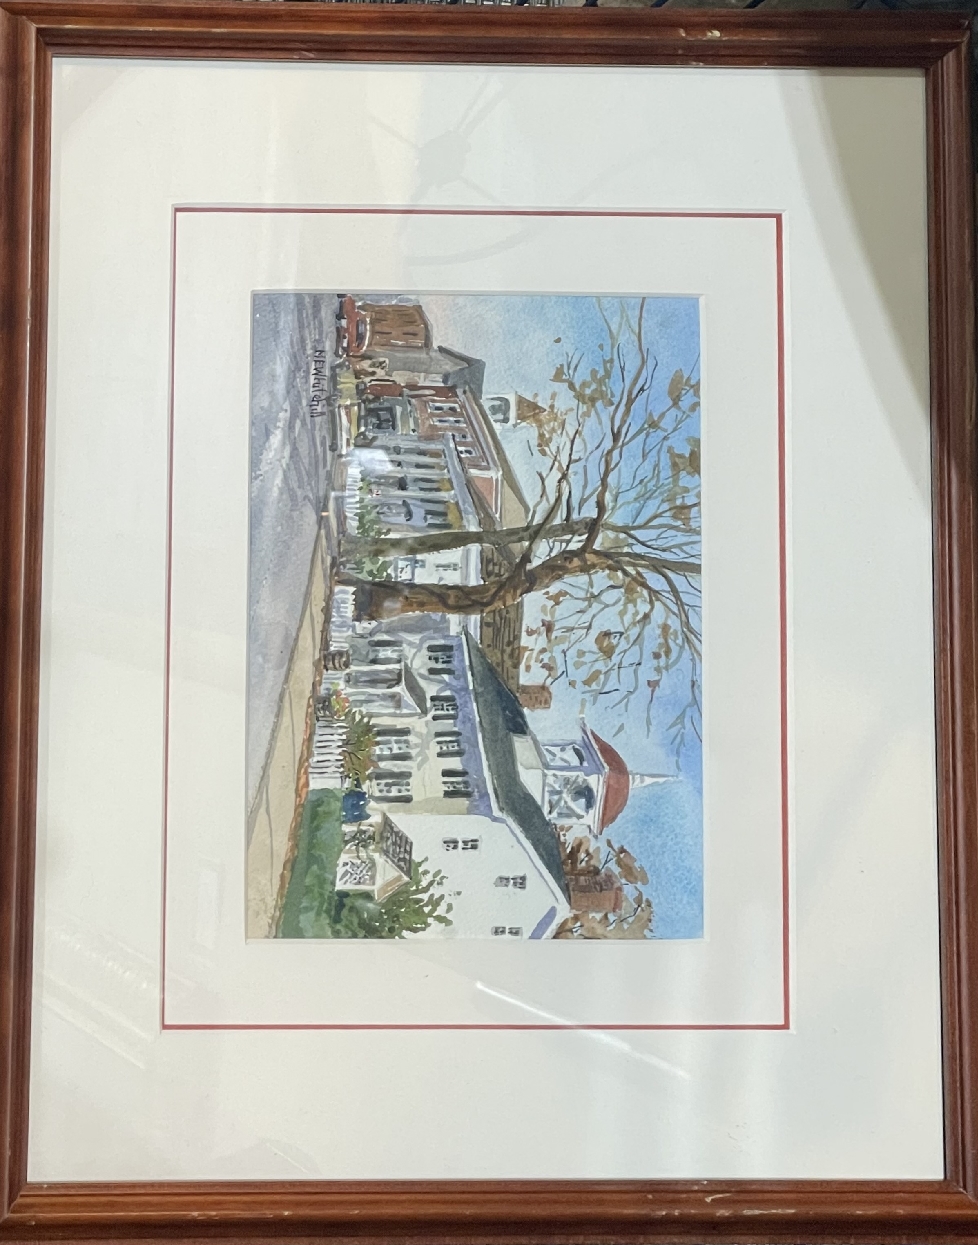 Framed Watercolor Painting of Bedford NY Main St
Mary Evelyn Whitehill